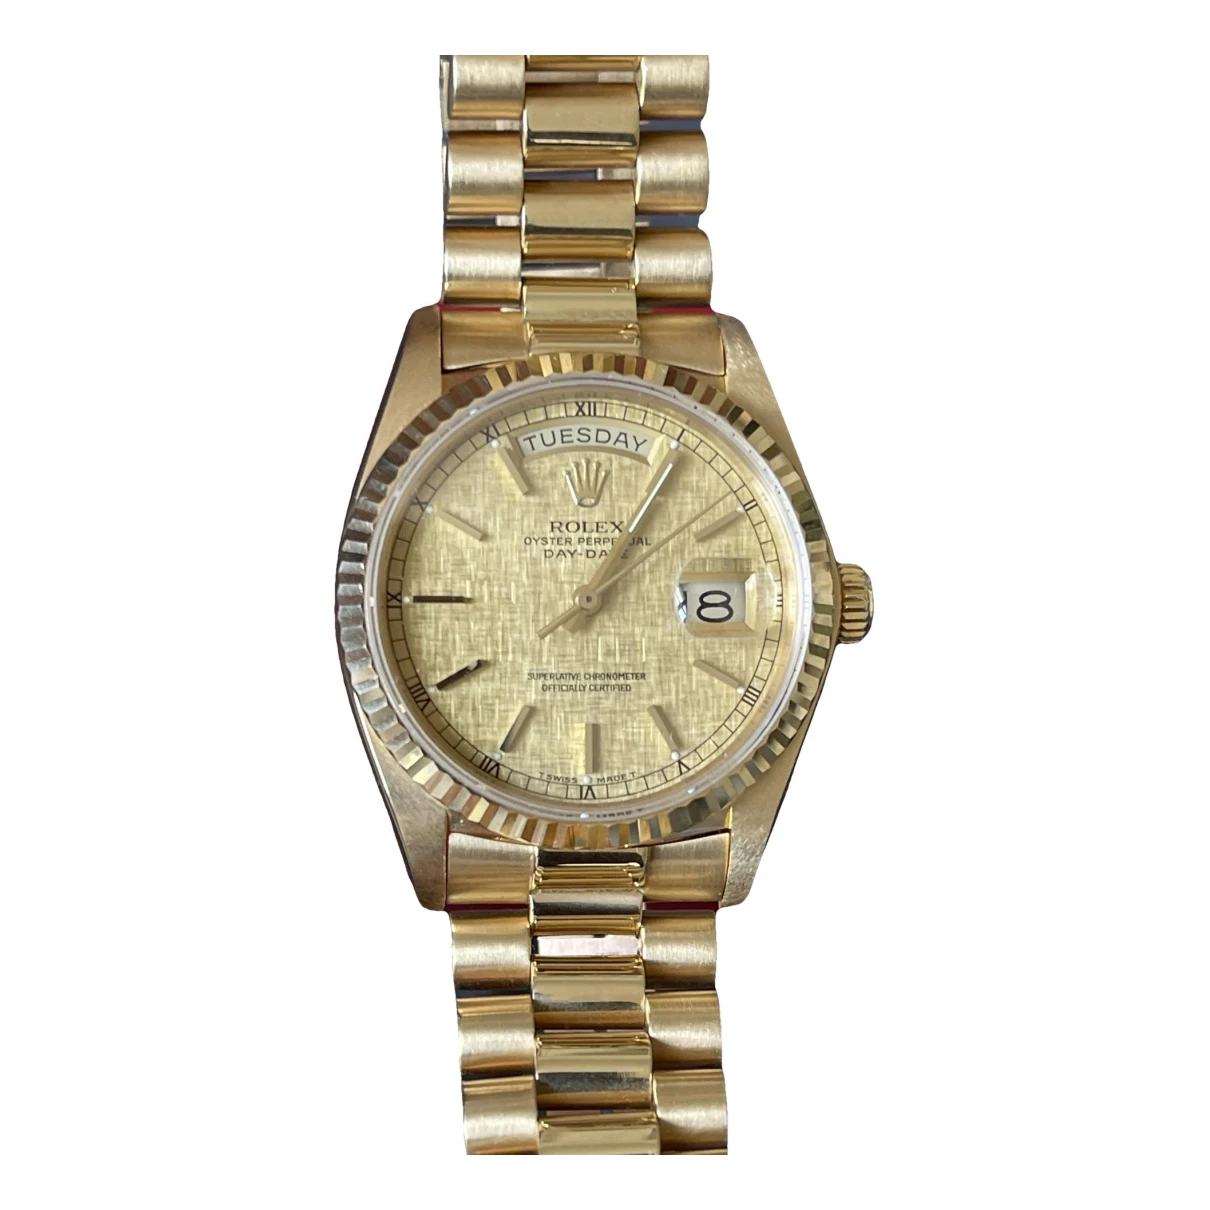 Pre-owned Rolex Day-date 36mm Yellow Gold Watch